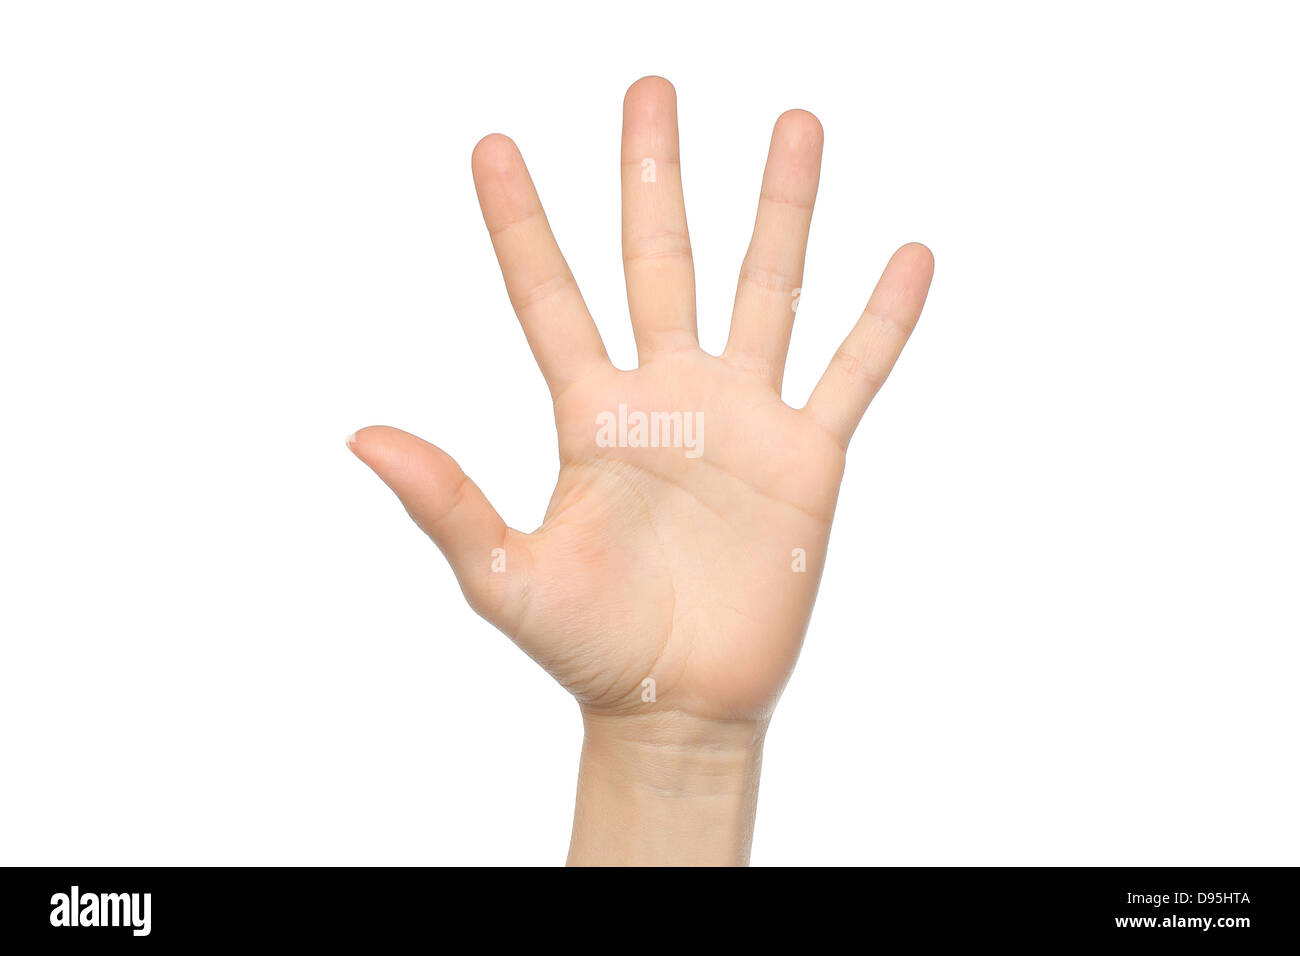 Woman hand showing five fingers on white background Stock Photo